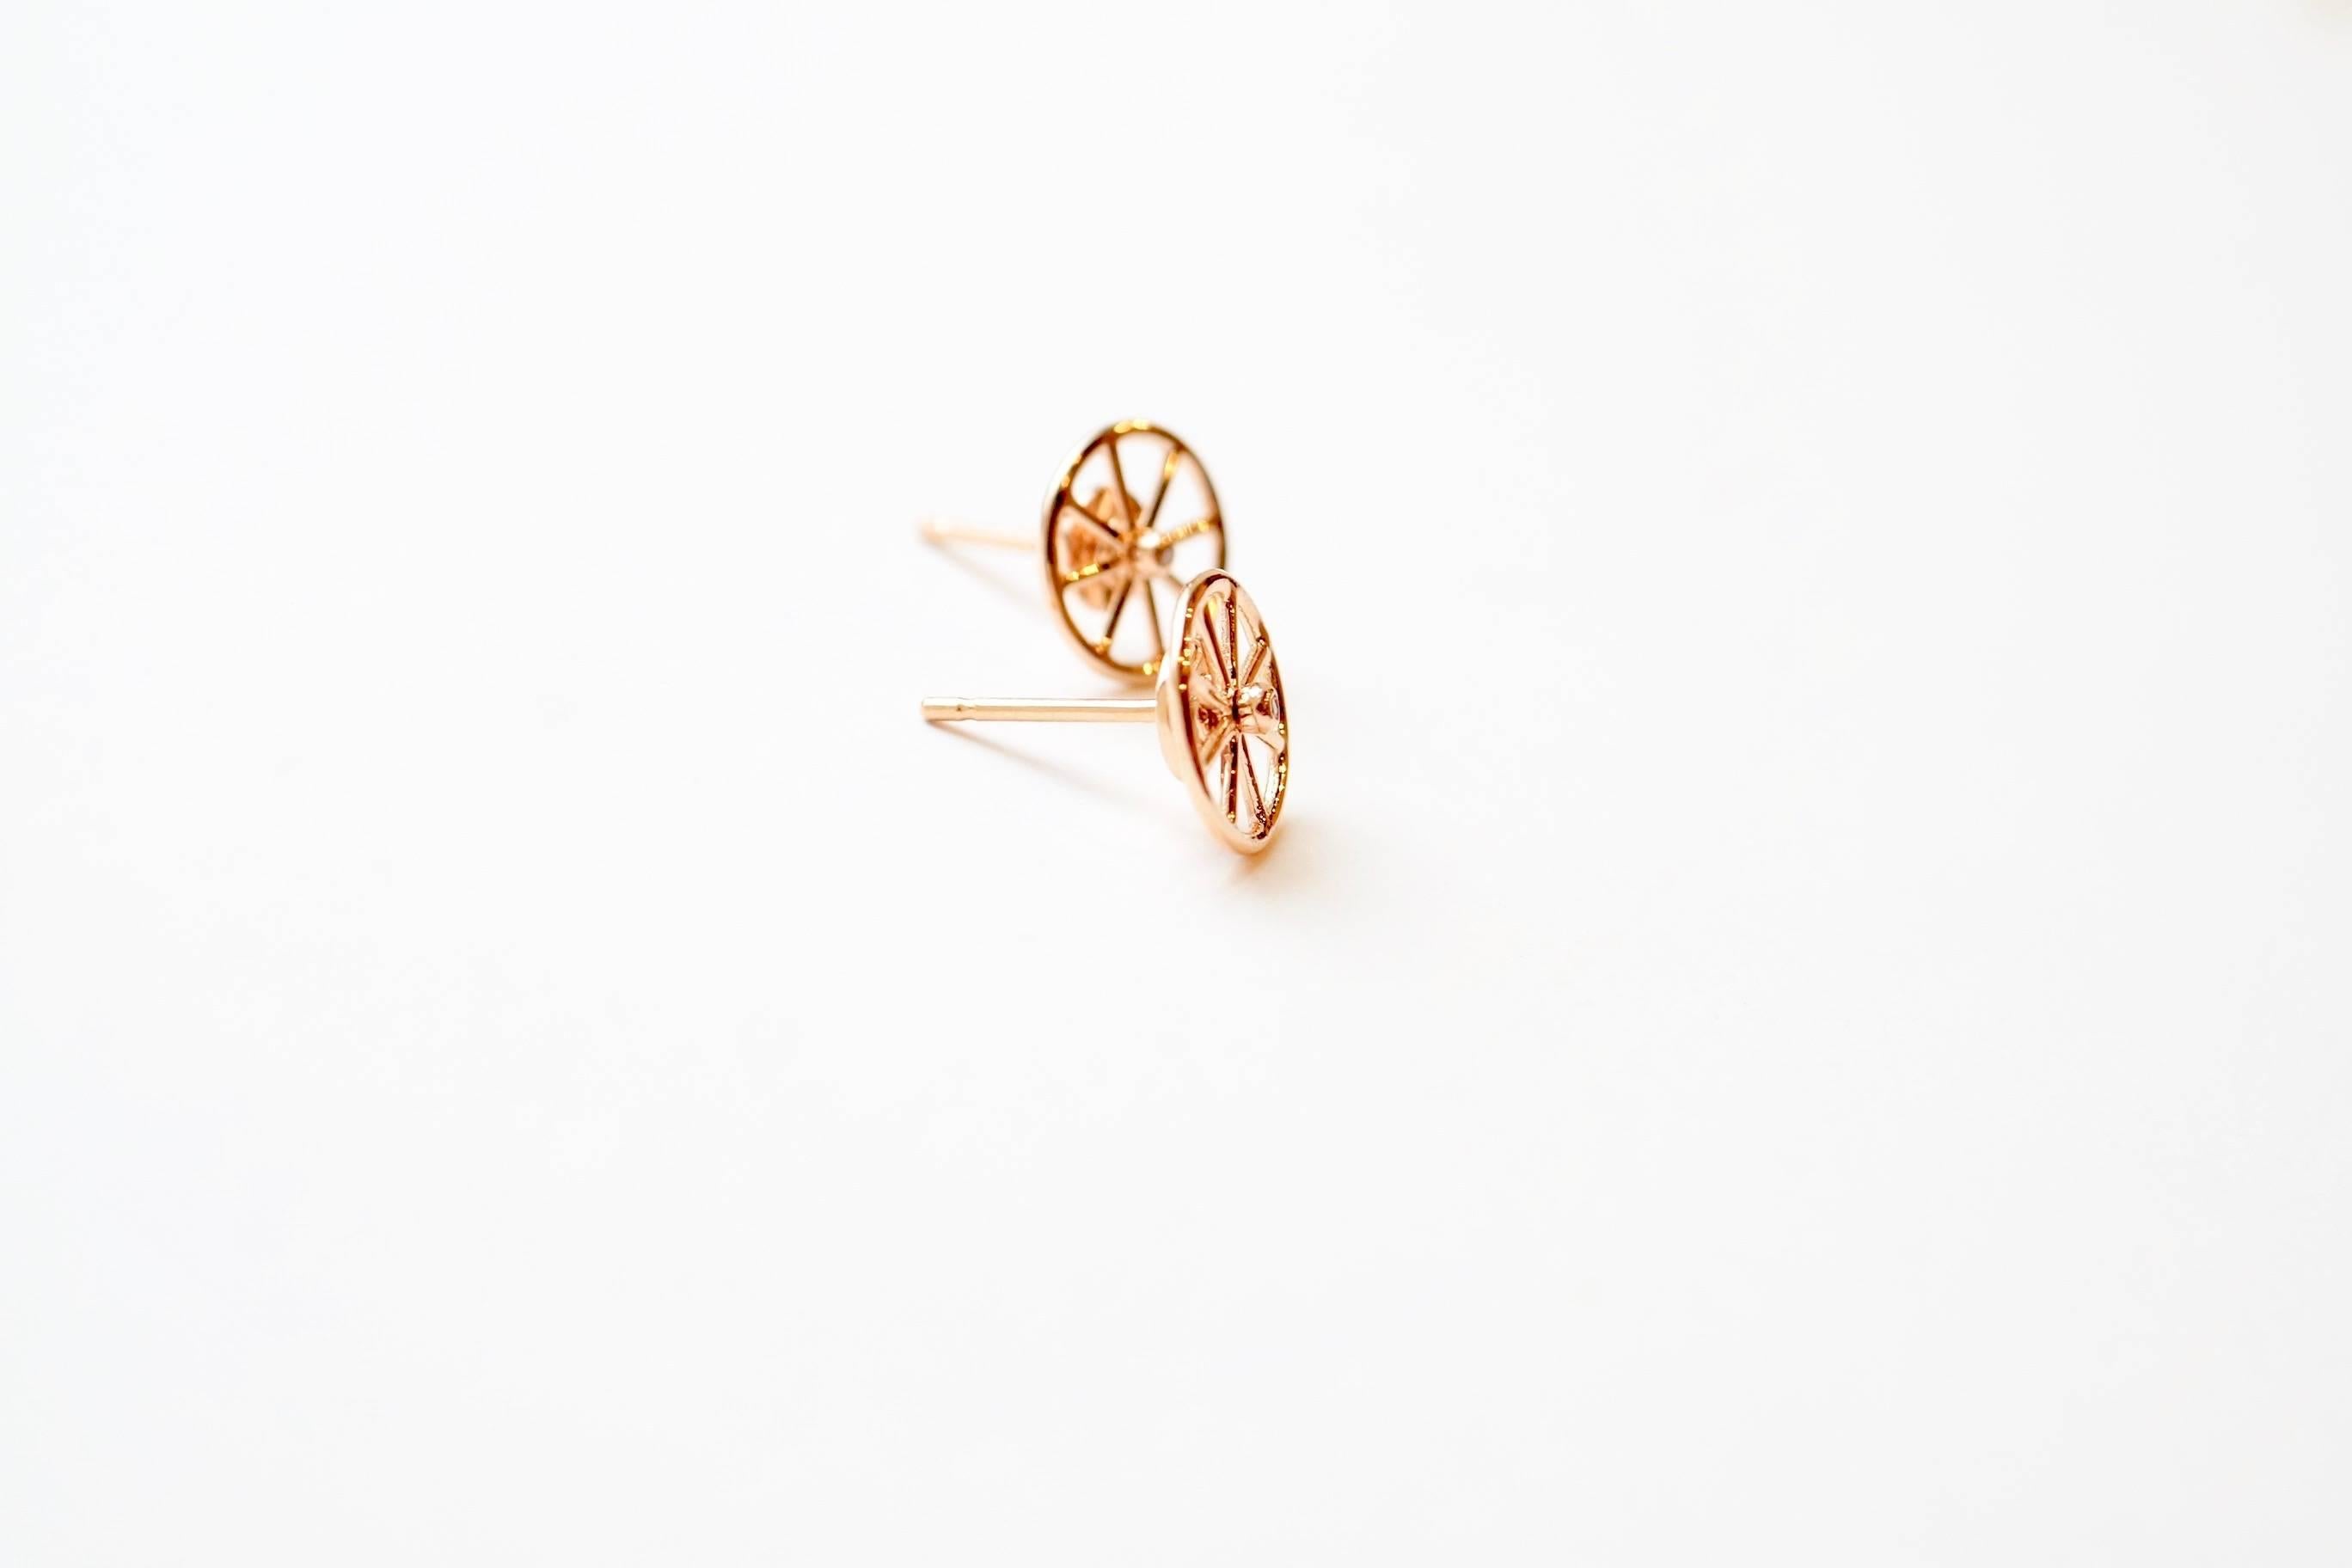 Billy Collection - Axle Stud Earrings
A pair of eighteen-karat rose gold stud earrings, each featuring a unique design of a delicately wrought wheel that may be rotated while on the ear. Each wheel is set with a single white diamond in the center of